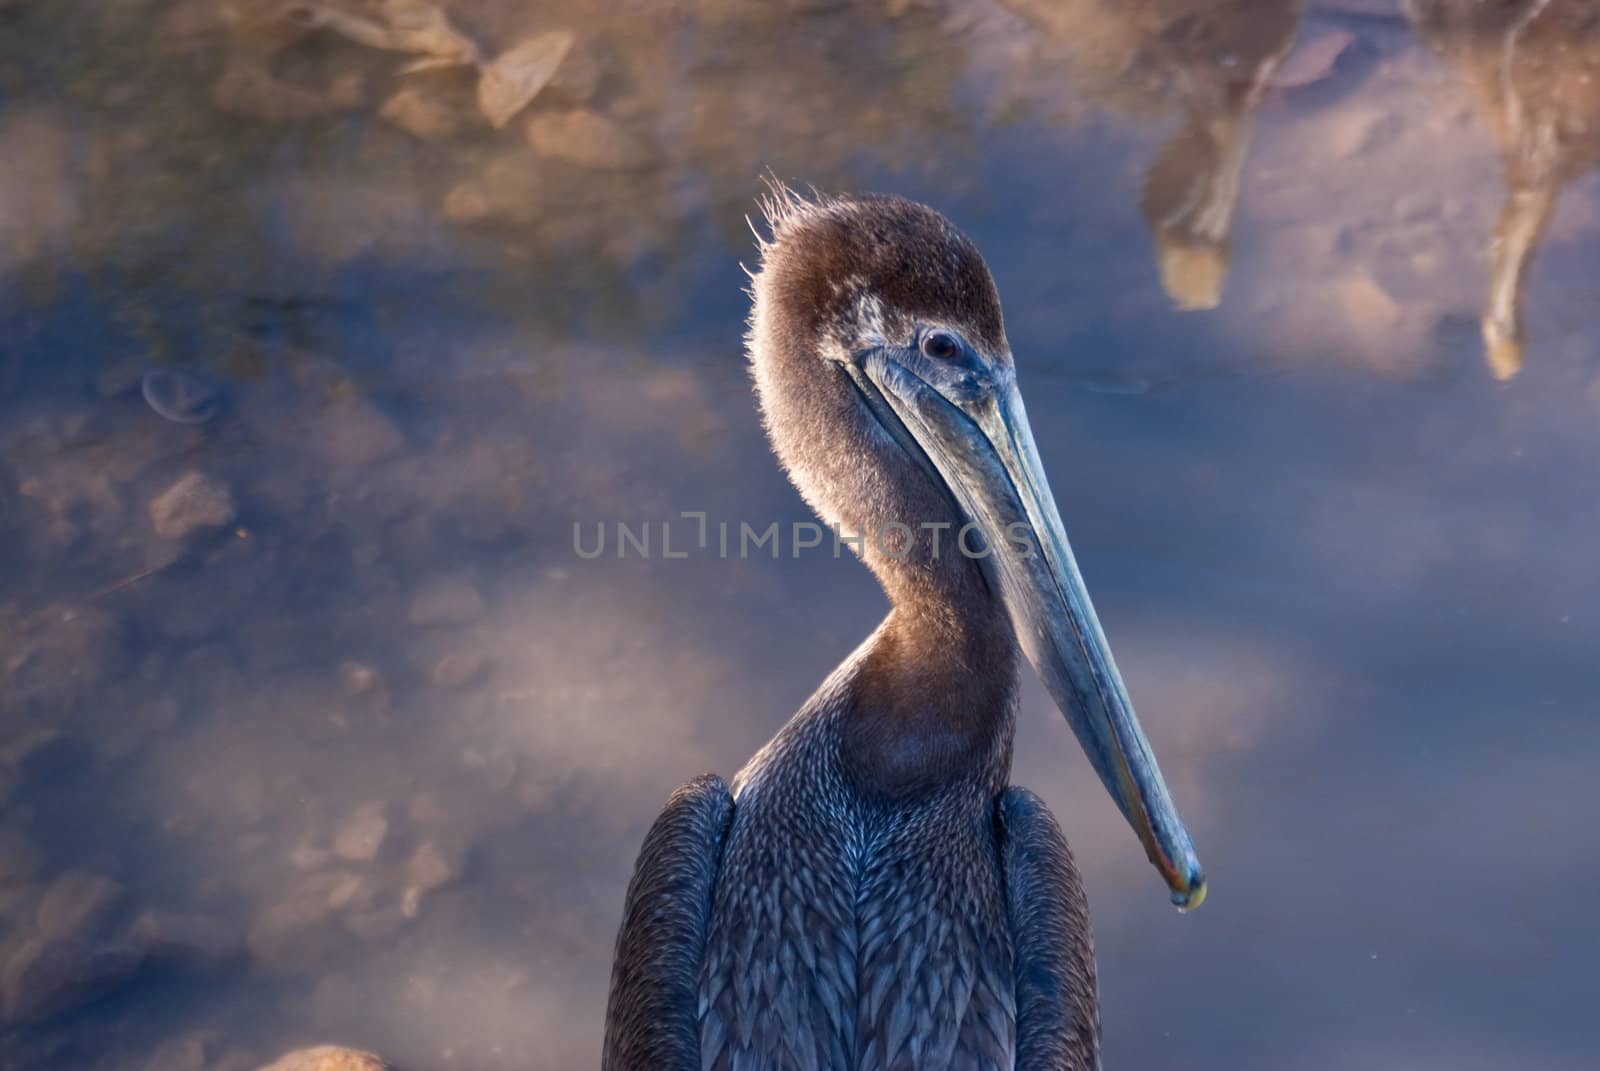 Young Pelican by emattil